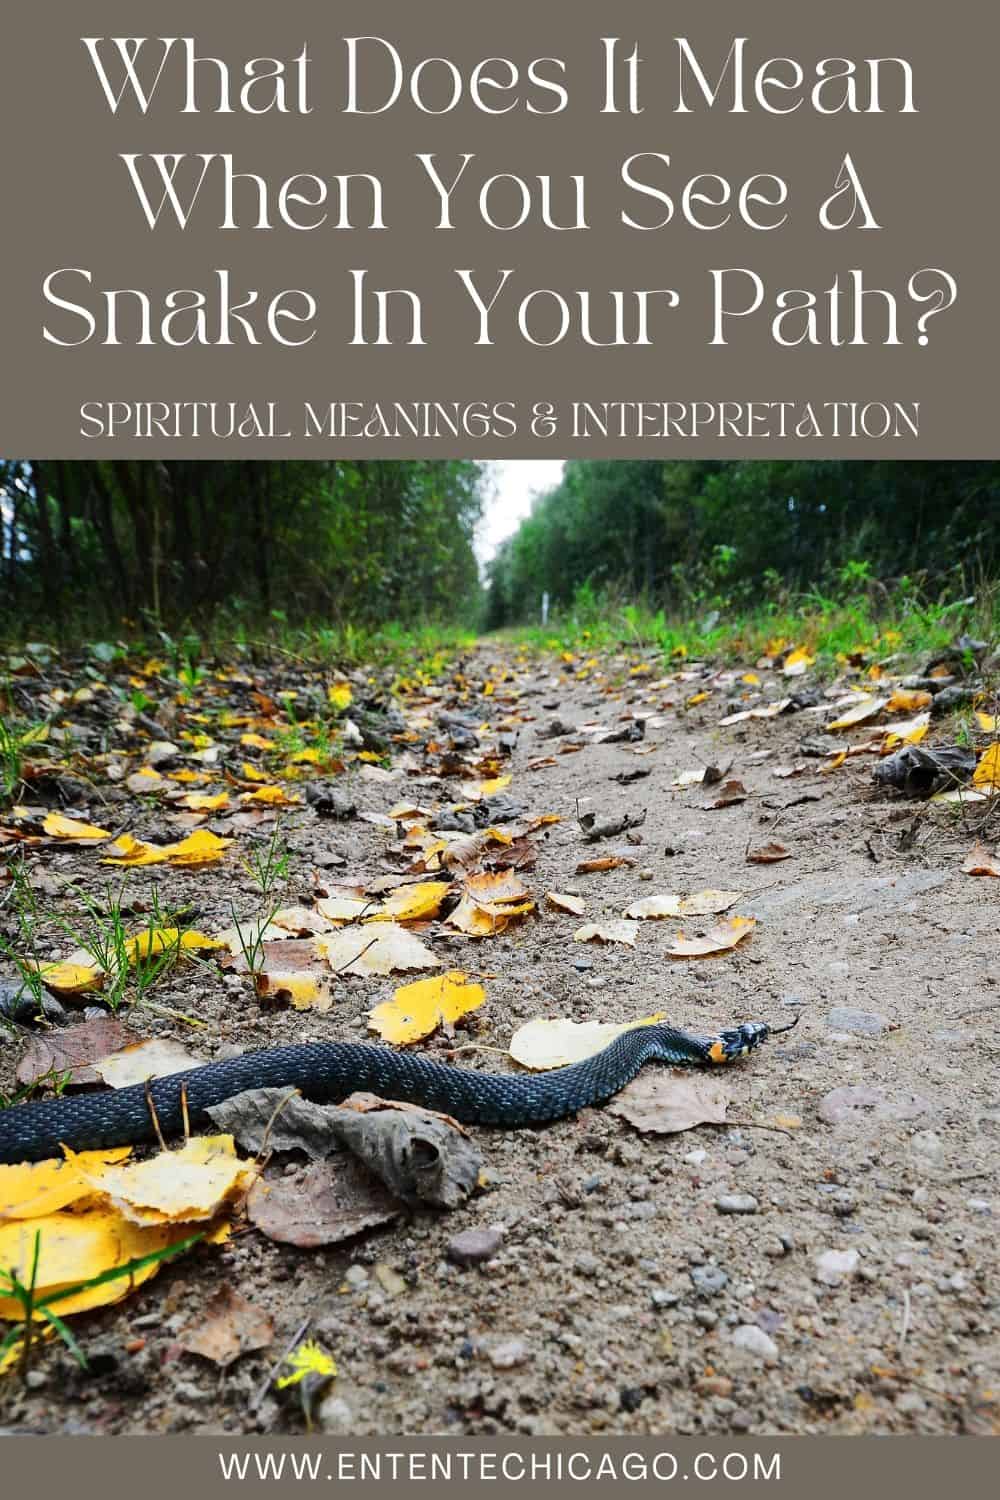 What Does It Mean When You See A Snake In Your Path (Spiritual Meanings & Interpretation)